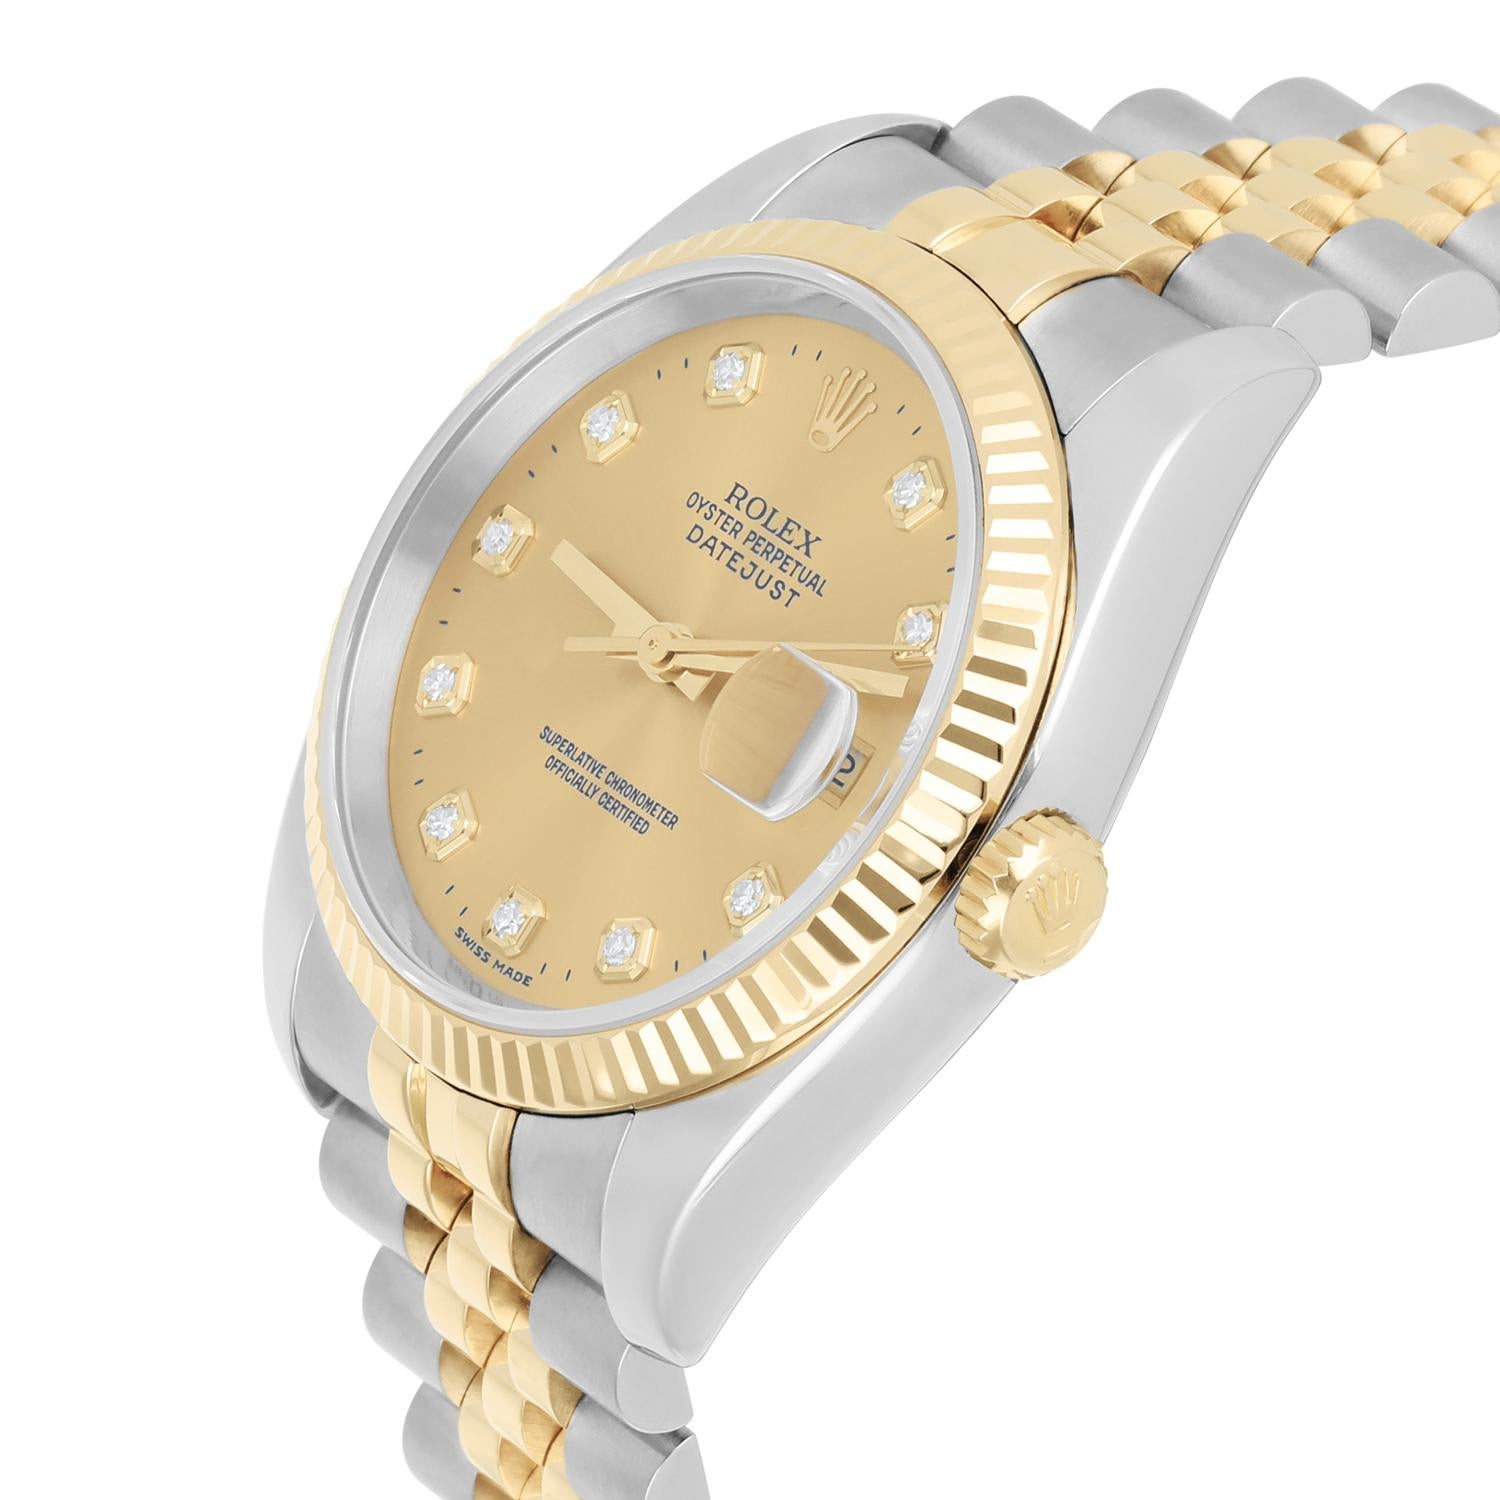 Rolex Datejust 36 Gold & Steel 116233 Watch Champagne Diamond Dial Jubilee Watch In Excellent Condition For Sale In New York, NY